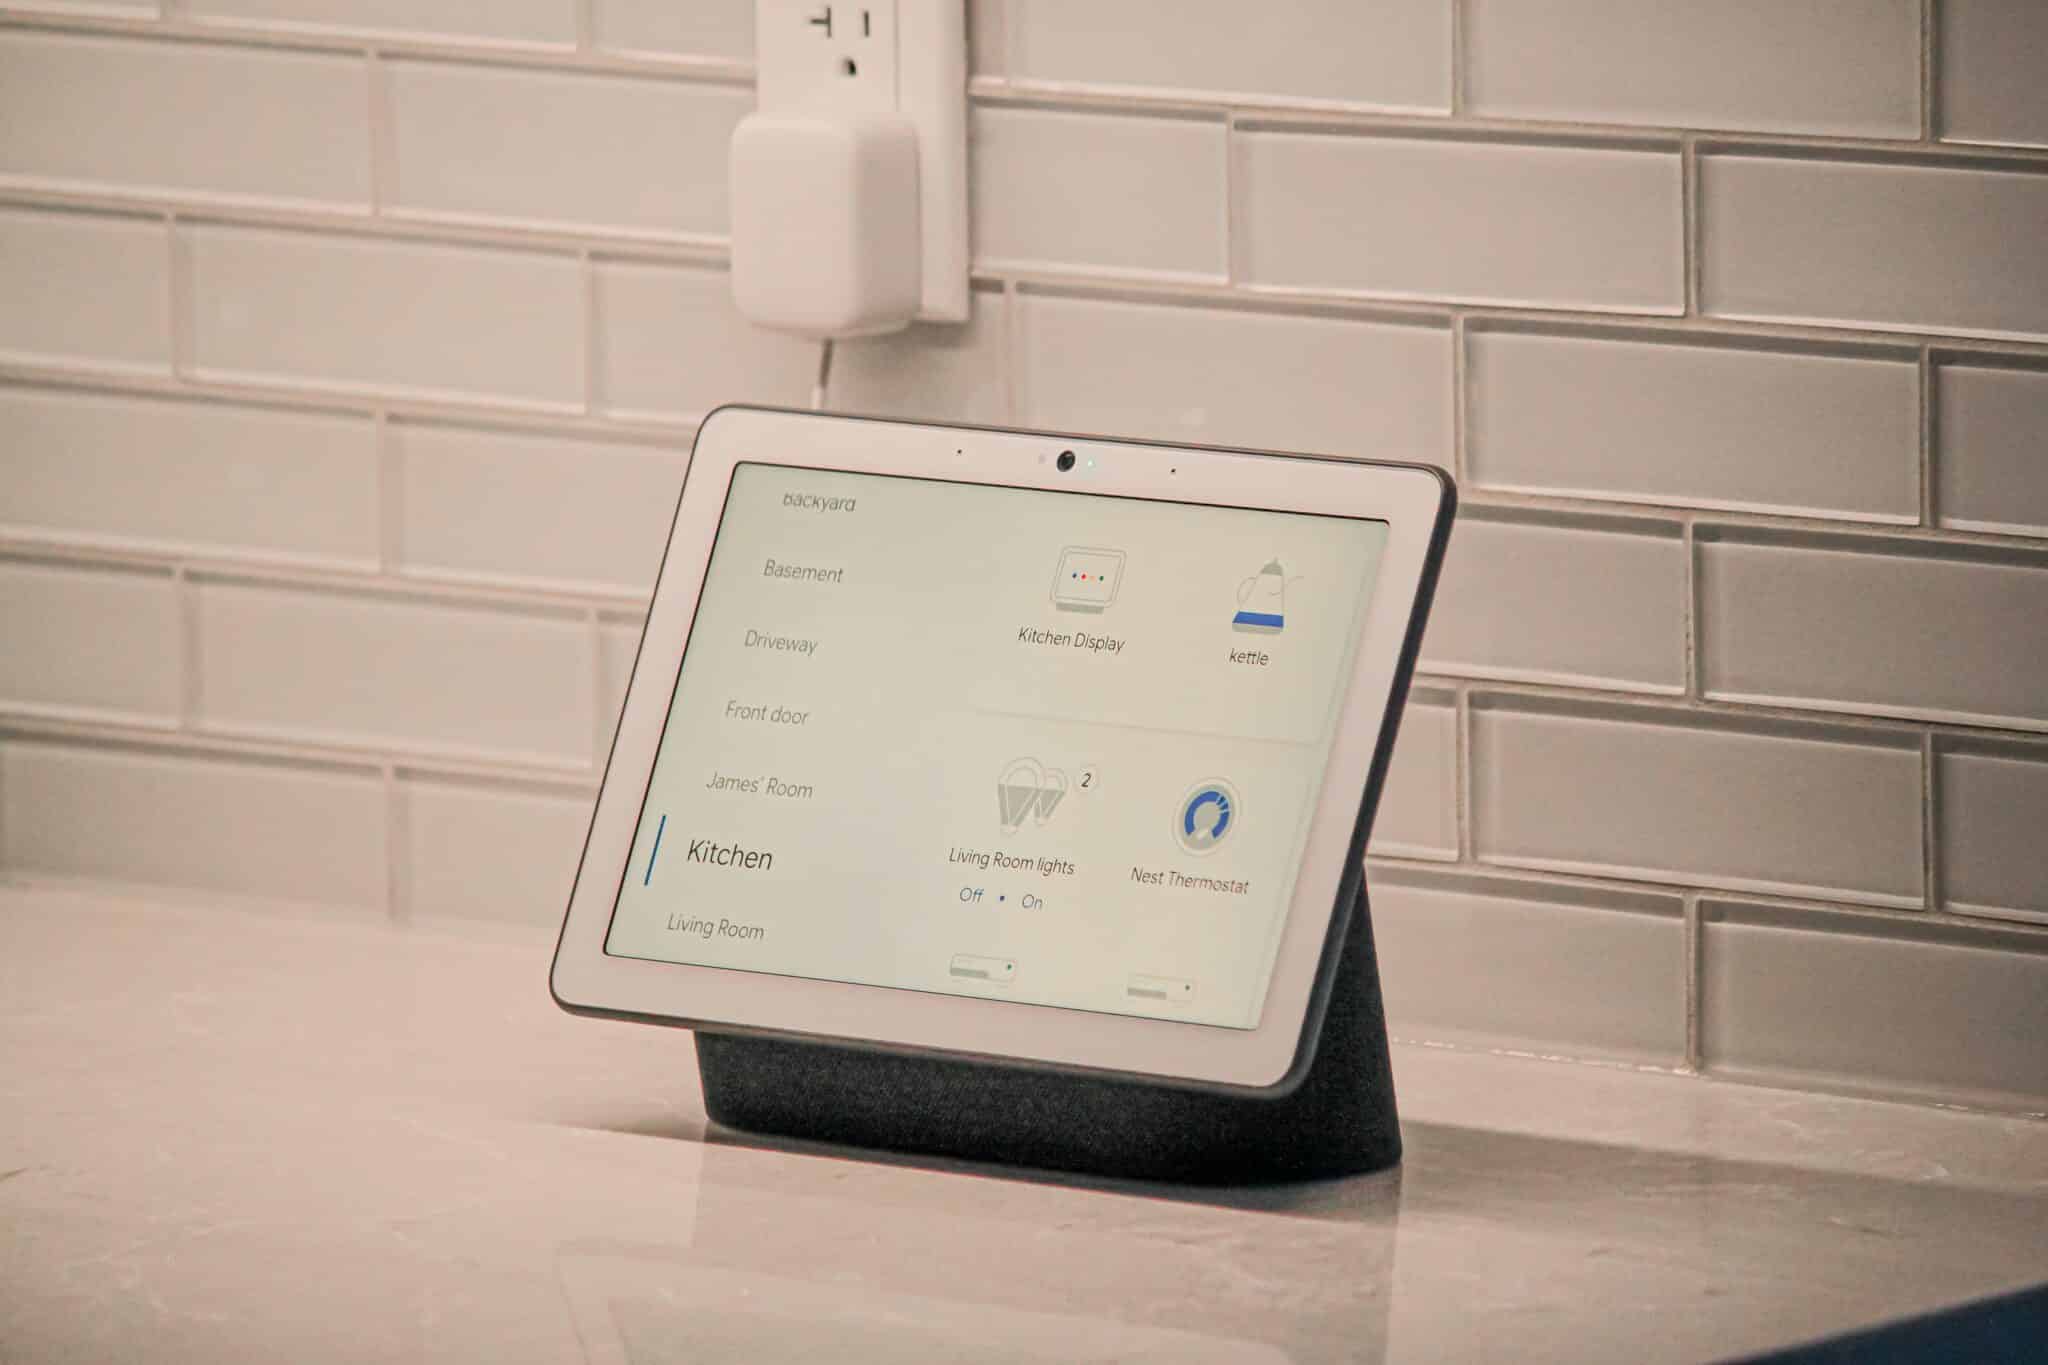 Google Home can be a hub for your smart home to help save money.